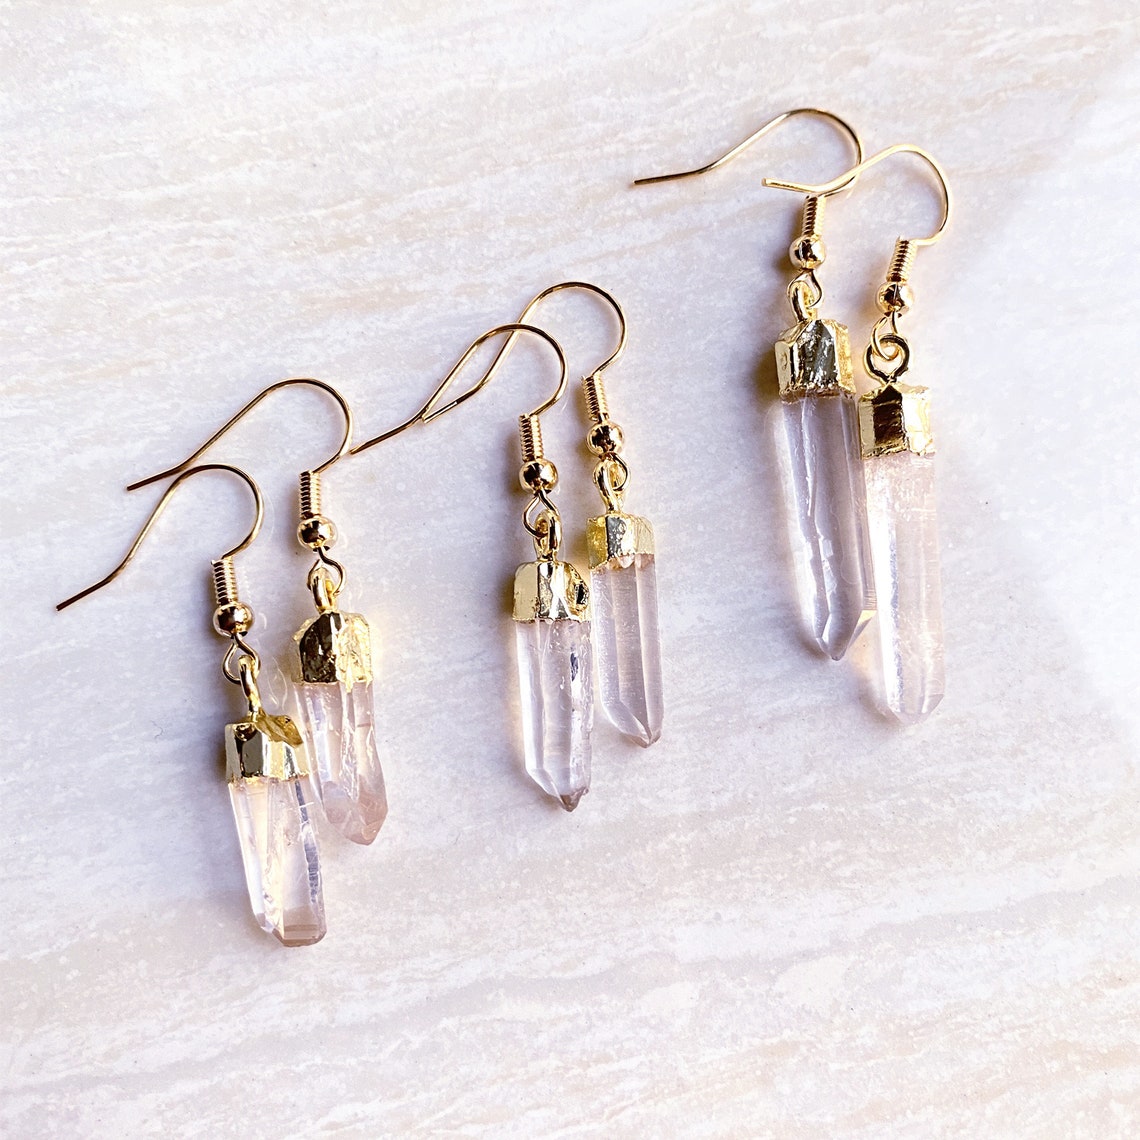 New Arrival Slender Rock Crystal Quartz Point Earrings With Etsy